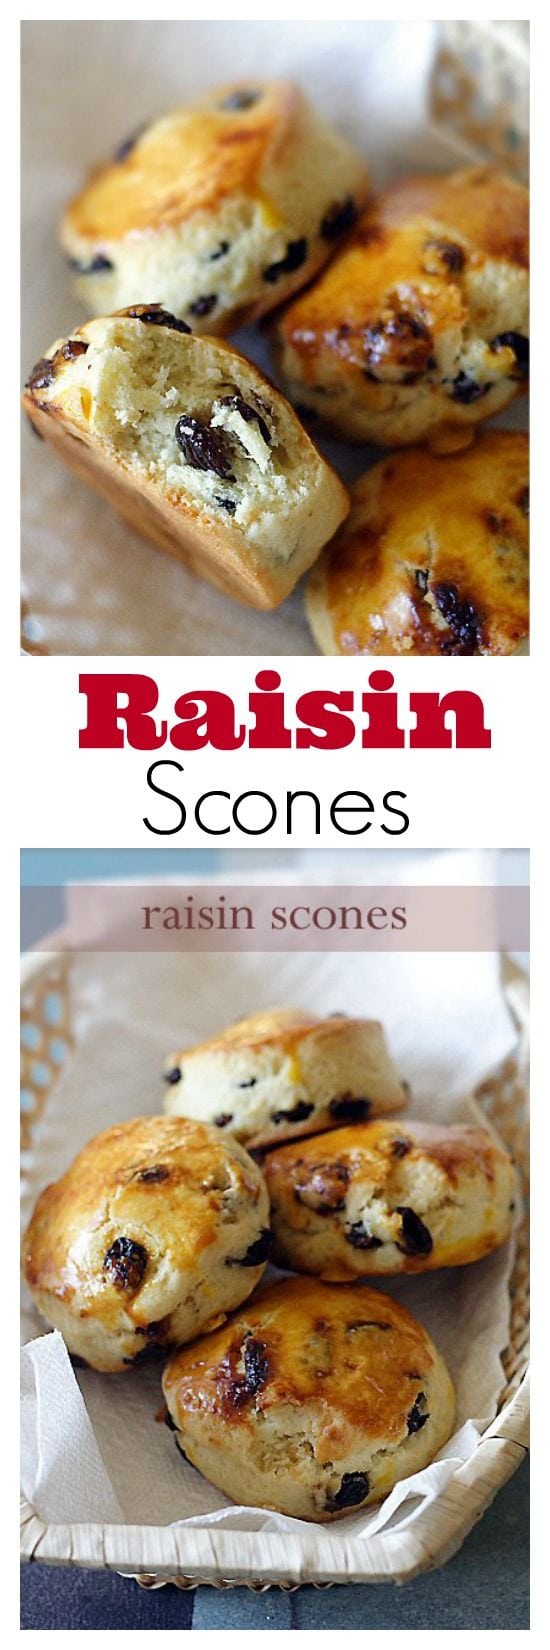 If you like raisins and scones. You will love this simple, irresistible, and delicious raisin scones recipe. These raisin scones are to die for. | rasamalaysia.com